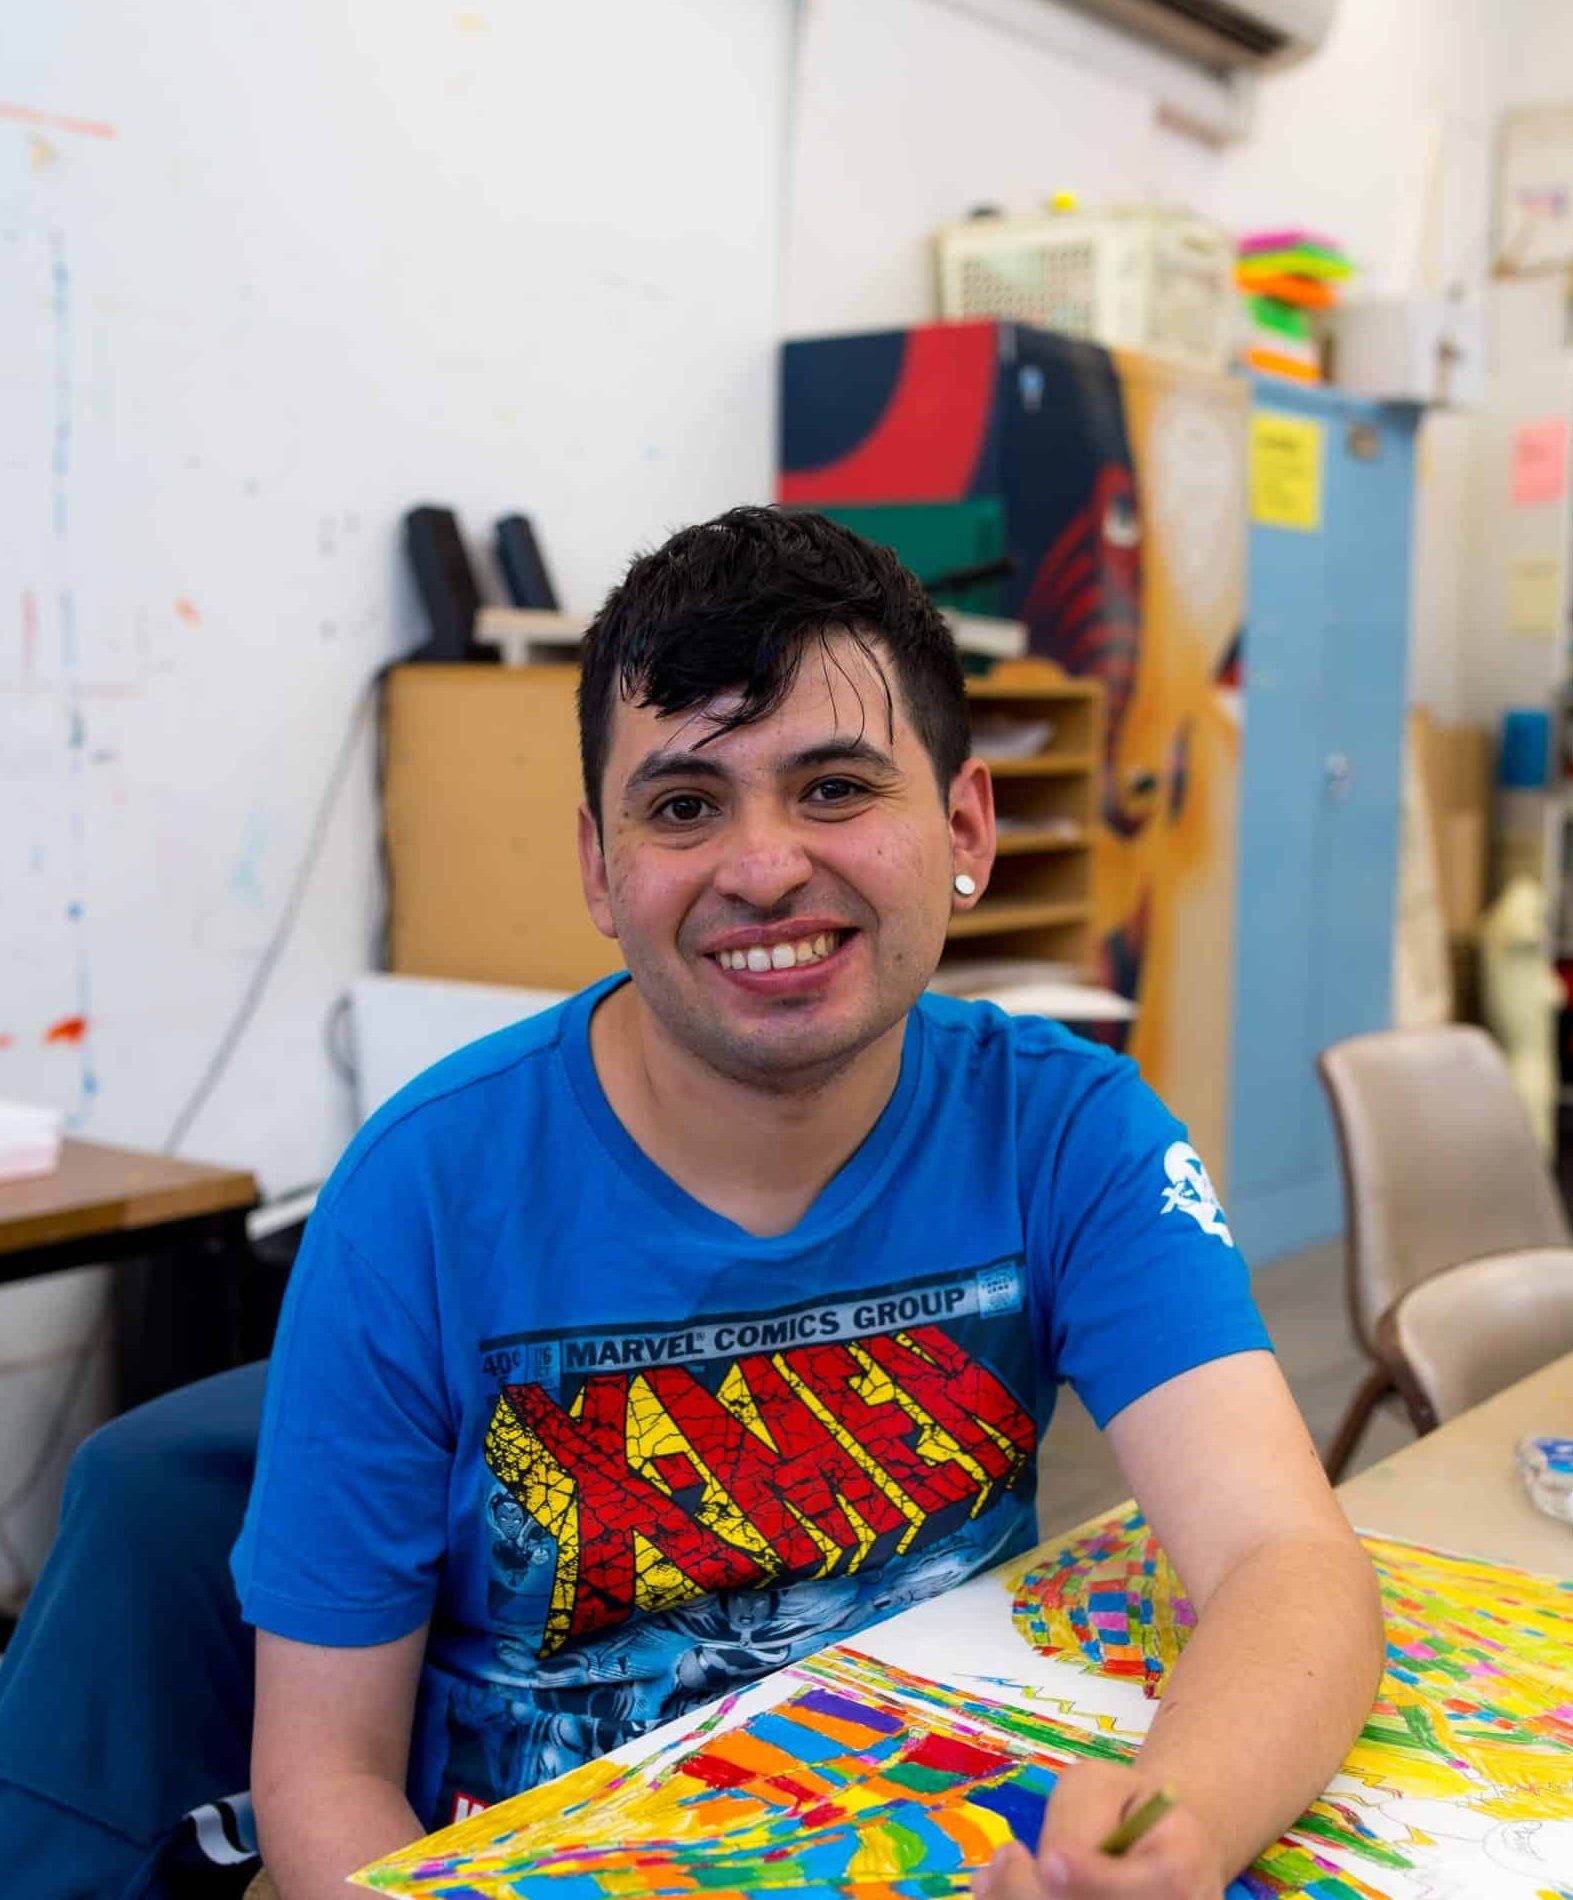 Image of Diego smiling with his artwork in front of him.